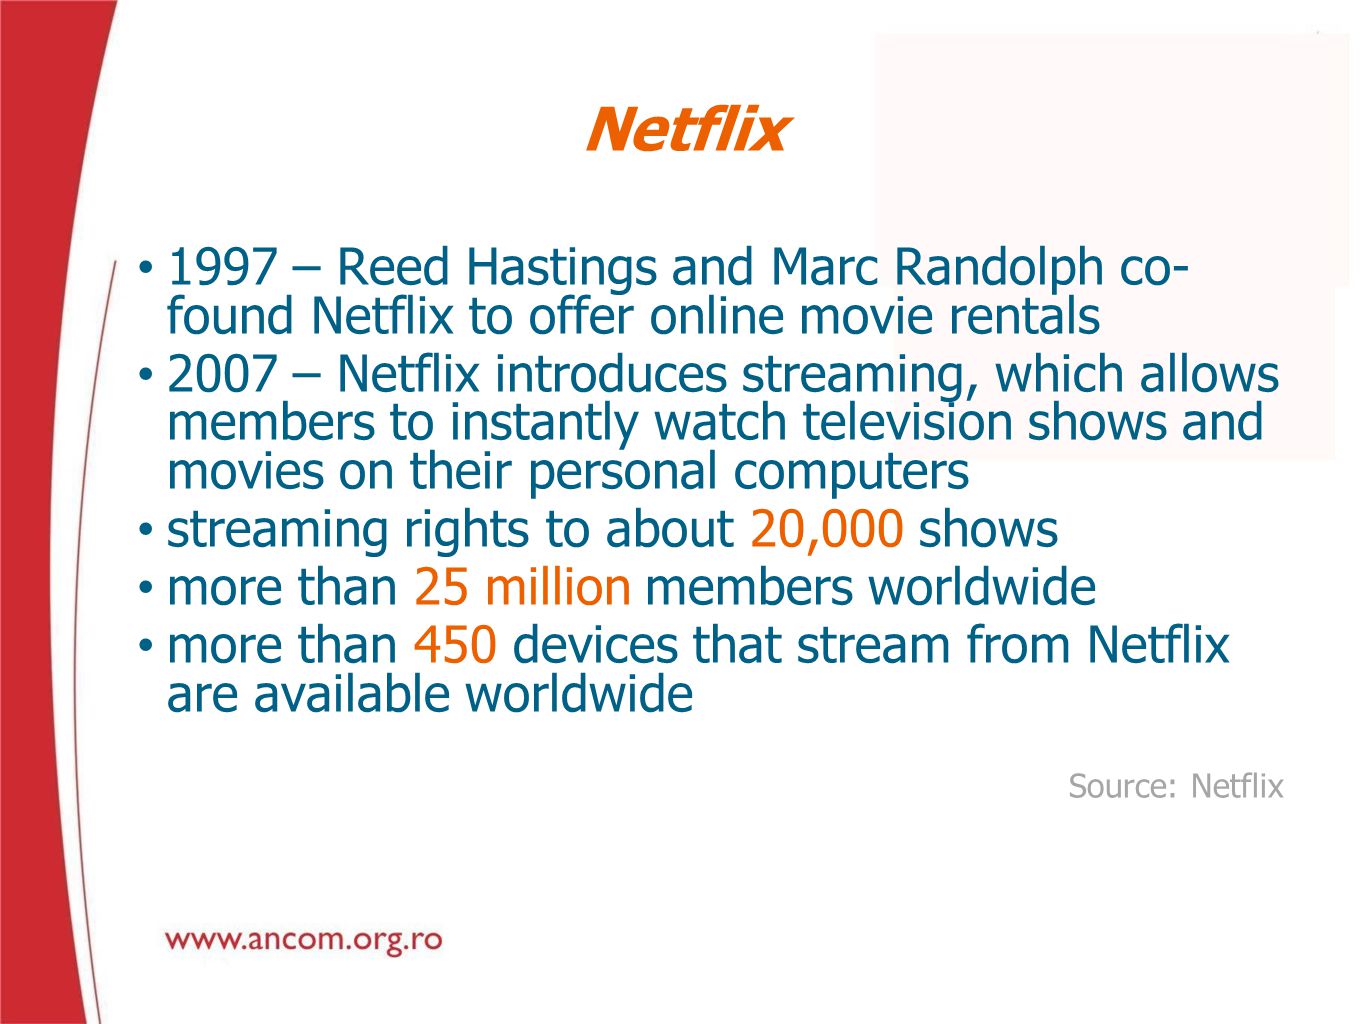 Netflix 1997 – Reed Hastings and Marc Randolph co- found Netflix to offer online movie rentals 2007 – Netflix introduces streaming, which allows members to instantly watch television shows and movies on their personal computers streaming rights to about 20,000 shows more than 25 million members worldwide more than 450 devices that stream from Netflix are available worldwide Source: Netflix